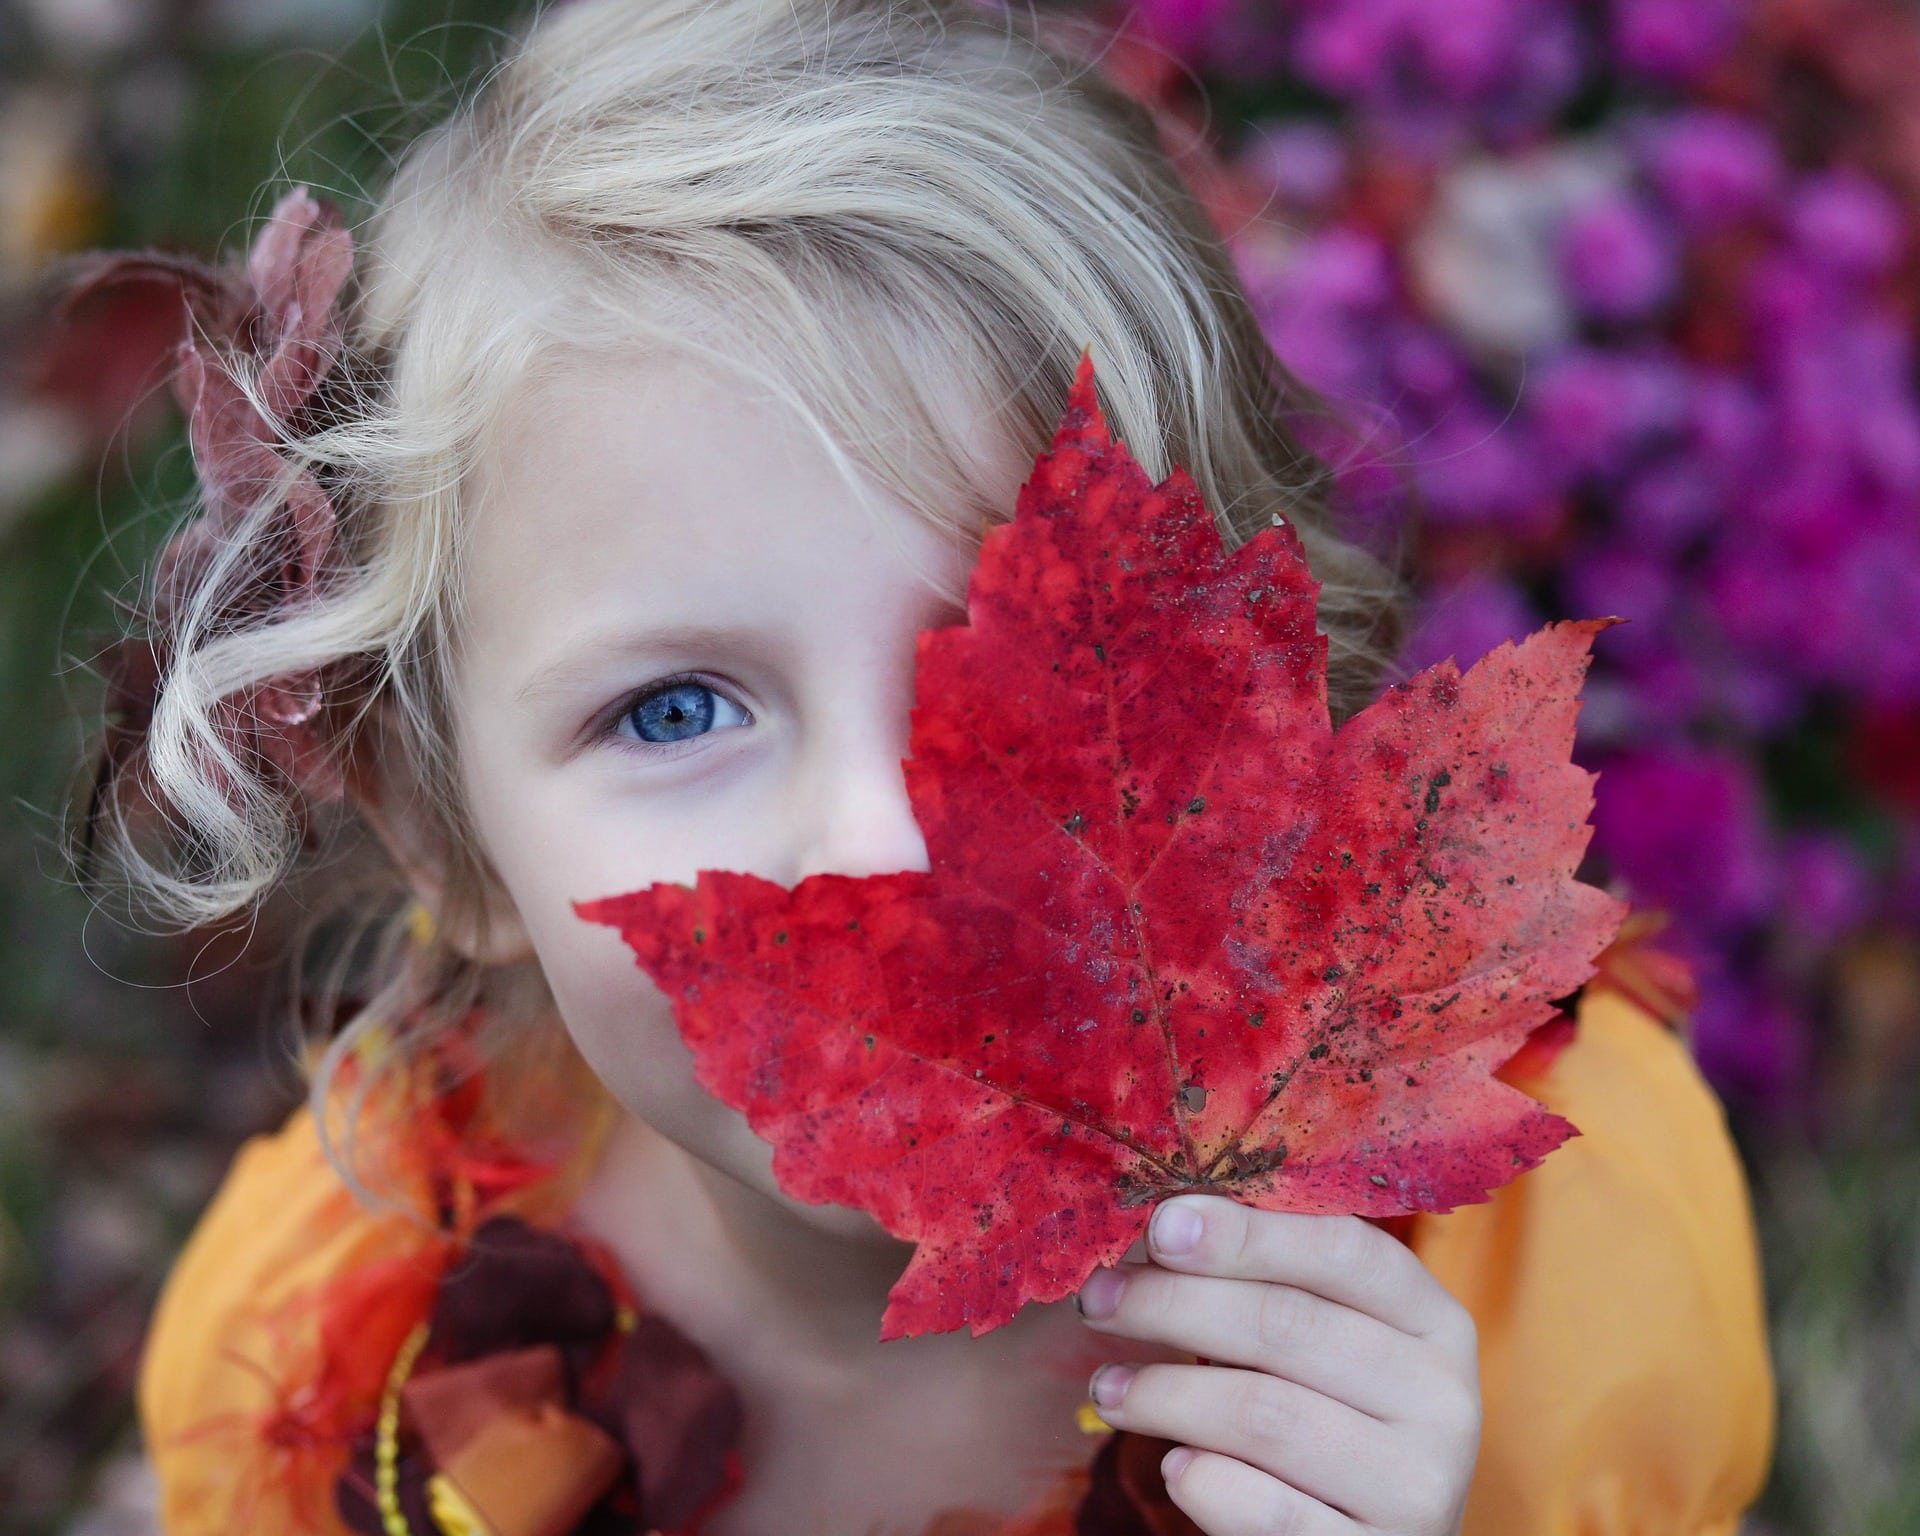 A young girl with blonde hair, who recently moved to Canada from the UK, holds a red autumn leaf to her face, revealing one blue eye, with a background of colorful foliage.